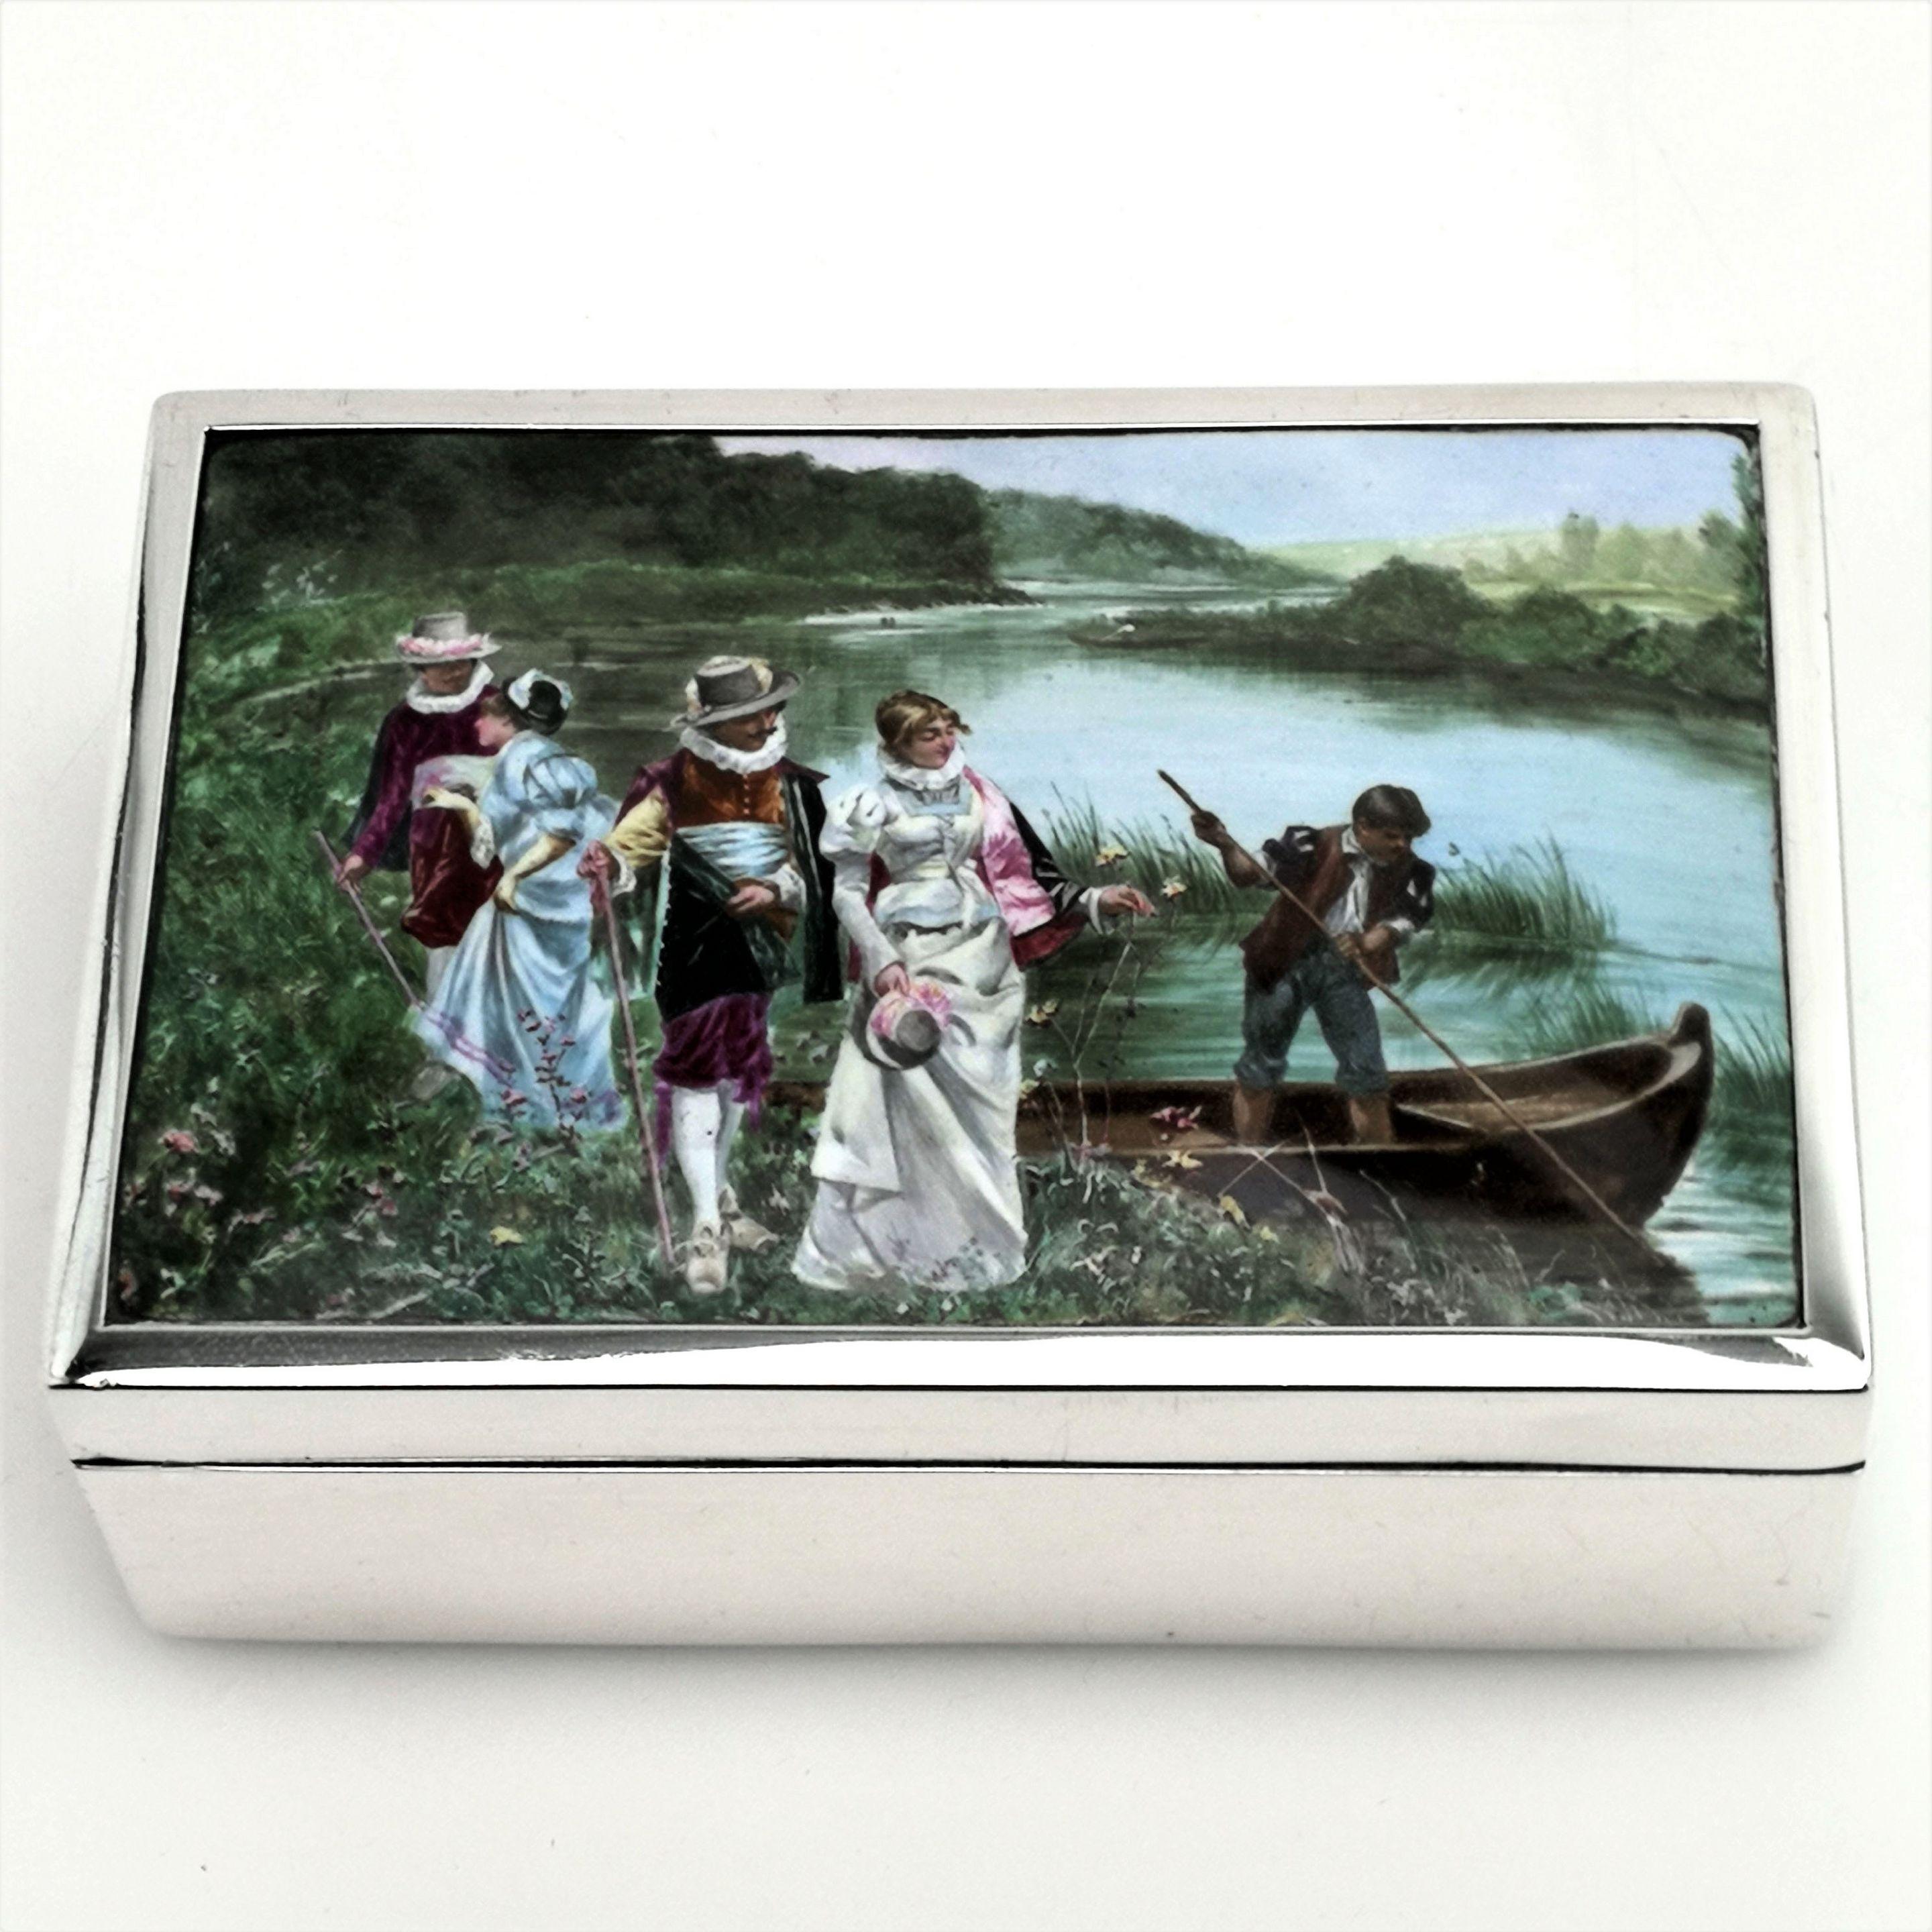 A beautiful Antique Victorian solid Silver and Enamel Box with a magnificent enamel panel on the lid. The panel shows two women dressed in white with two gentlemen walking on a river bank with a boatman on the water. The image is created in deep,